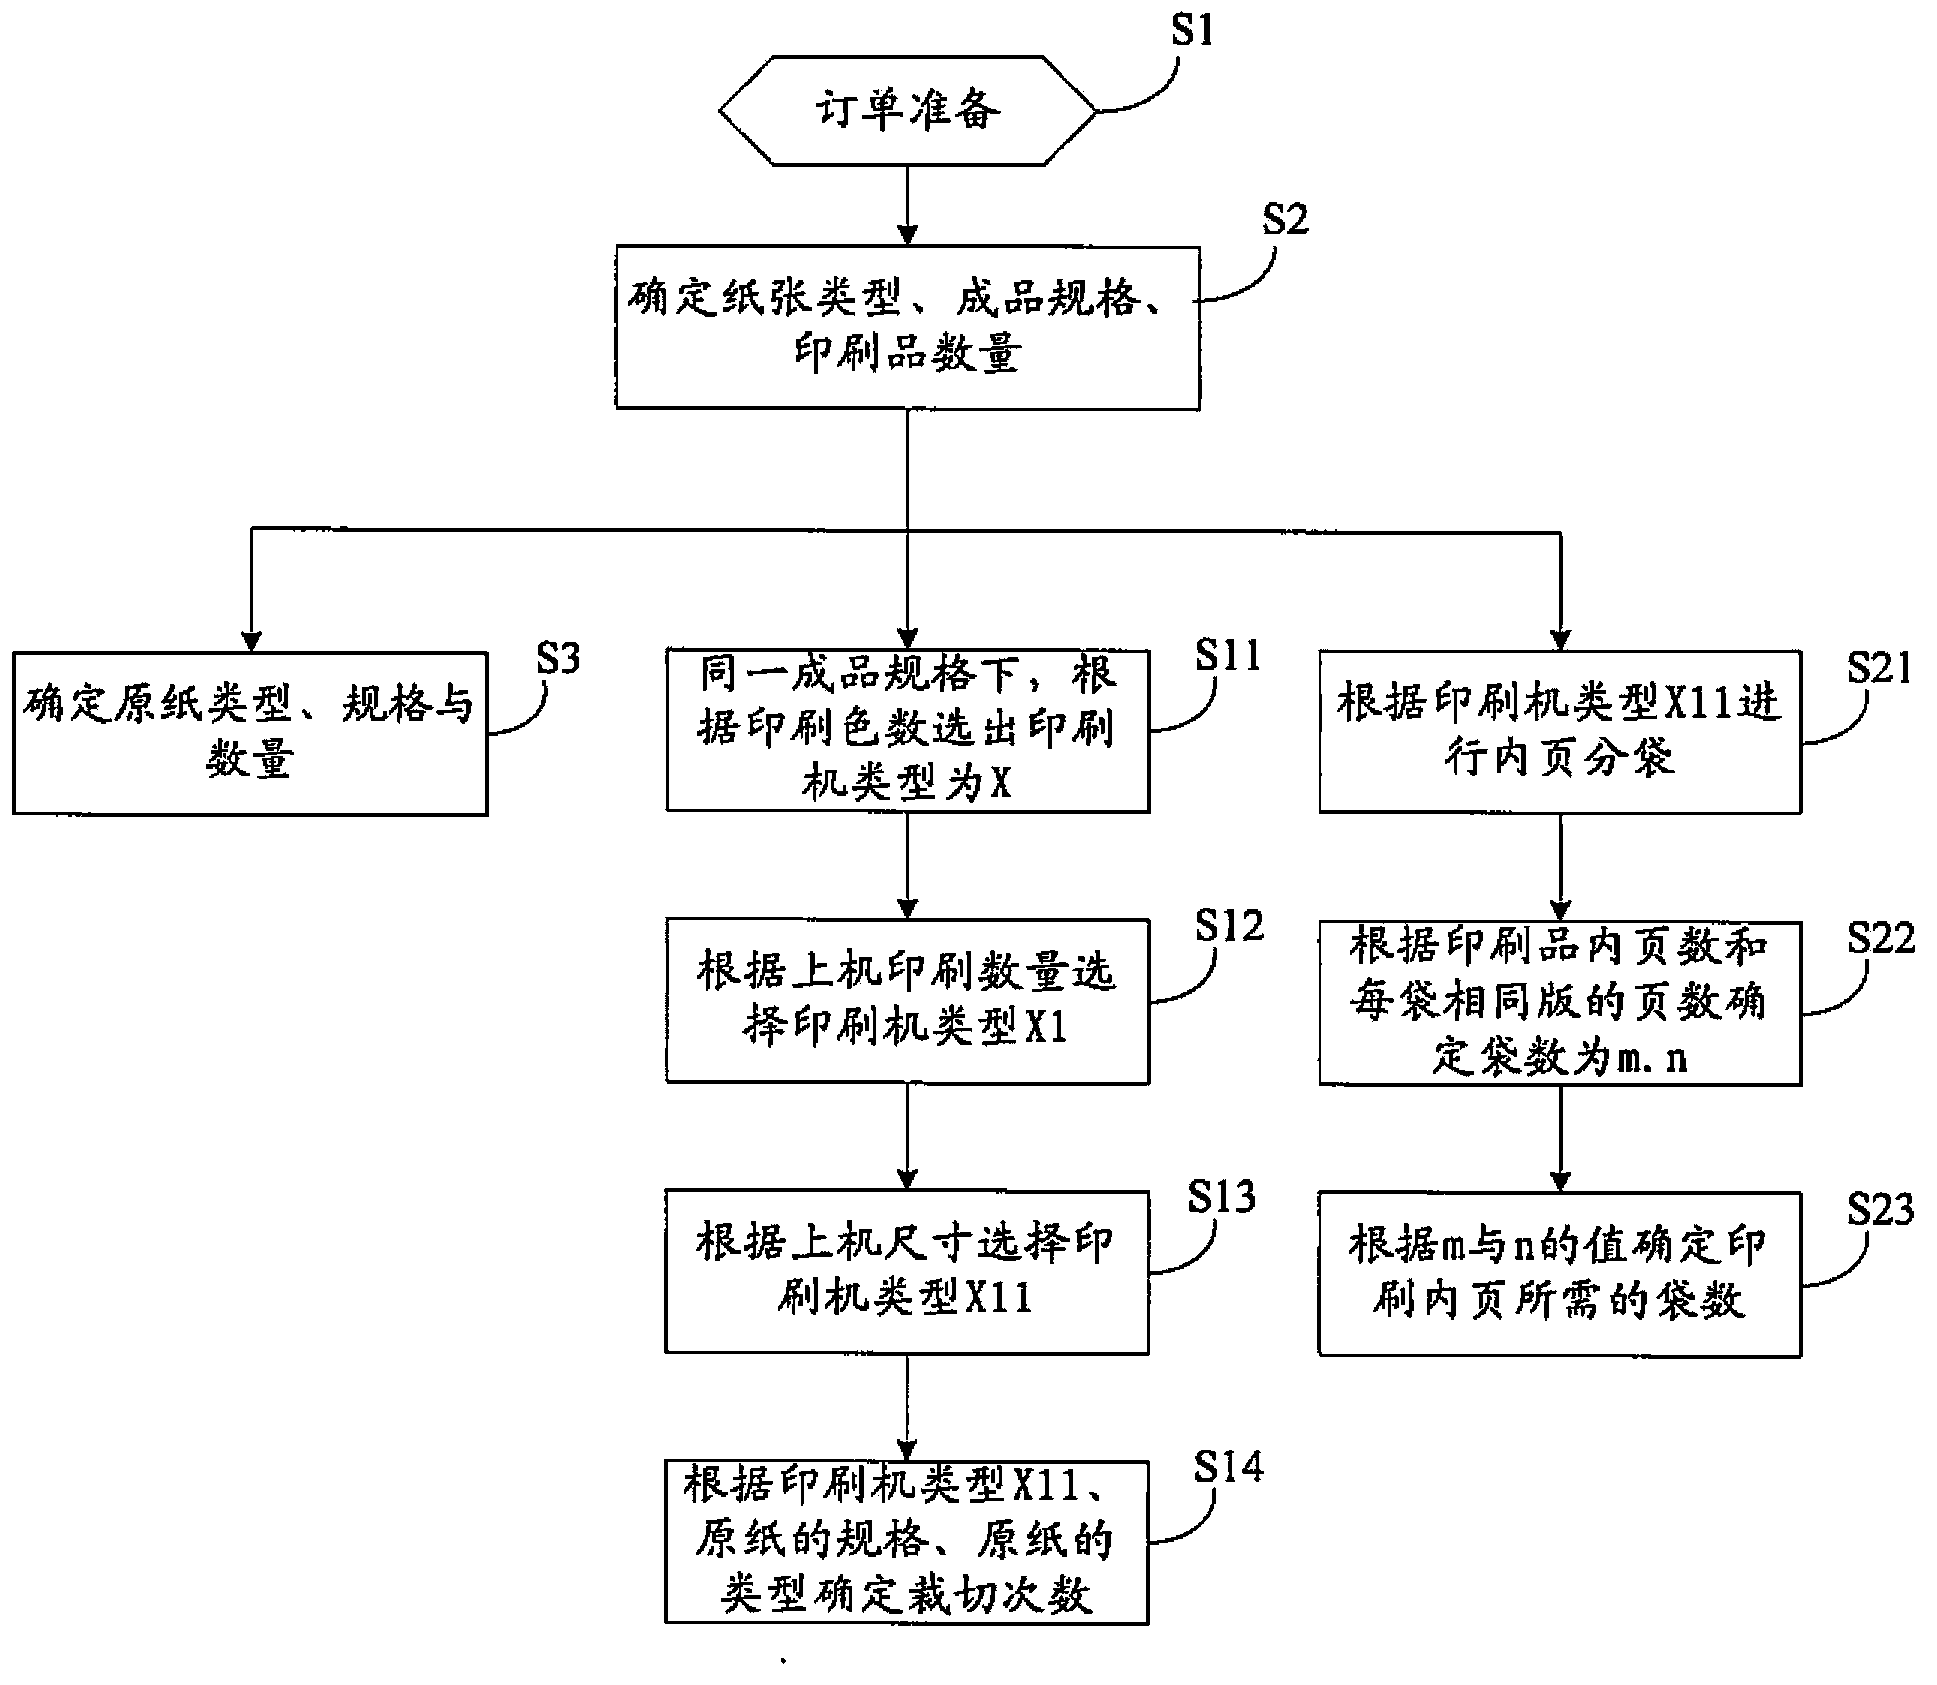 Single paper printing, opening and cutting method